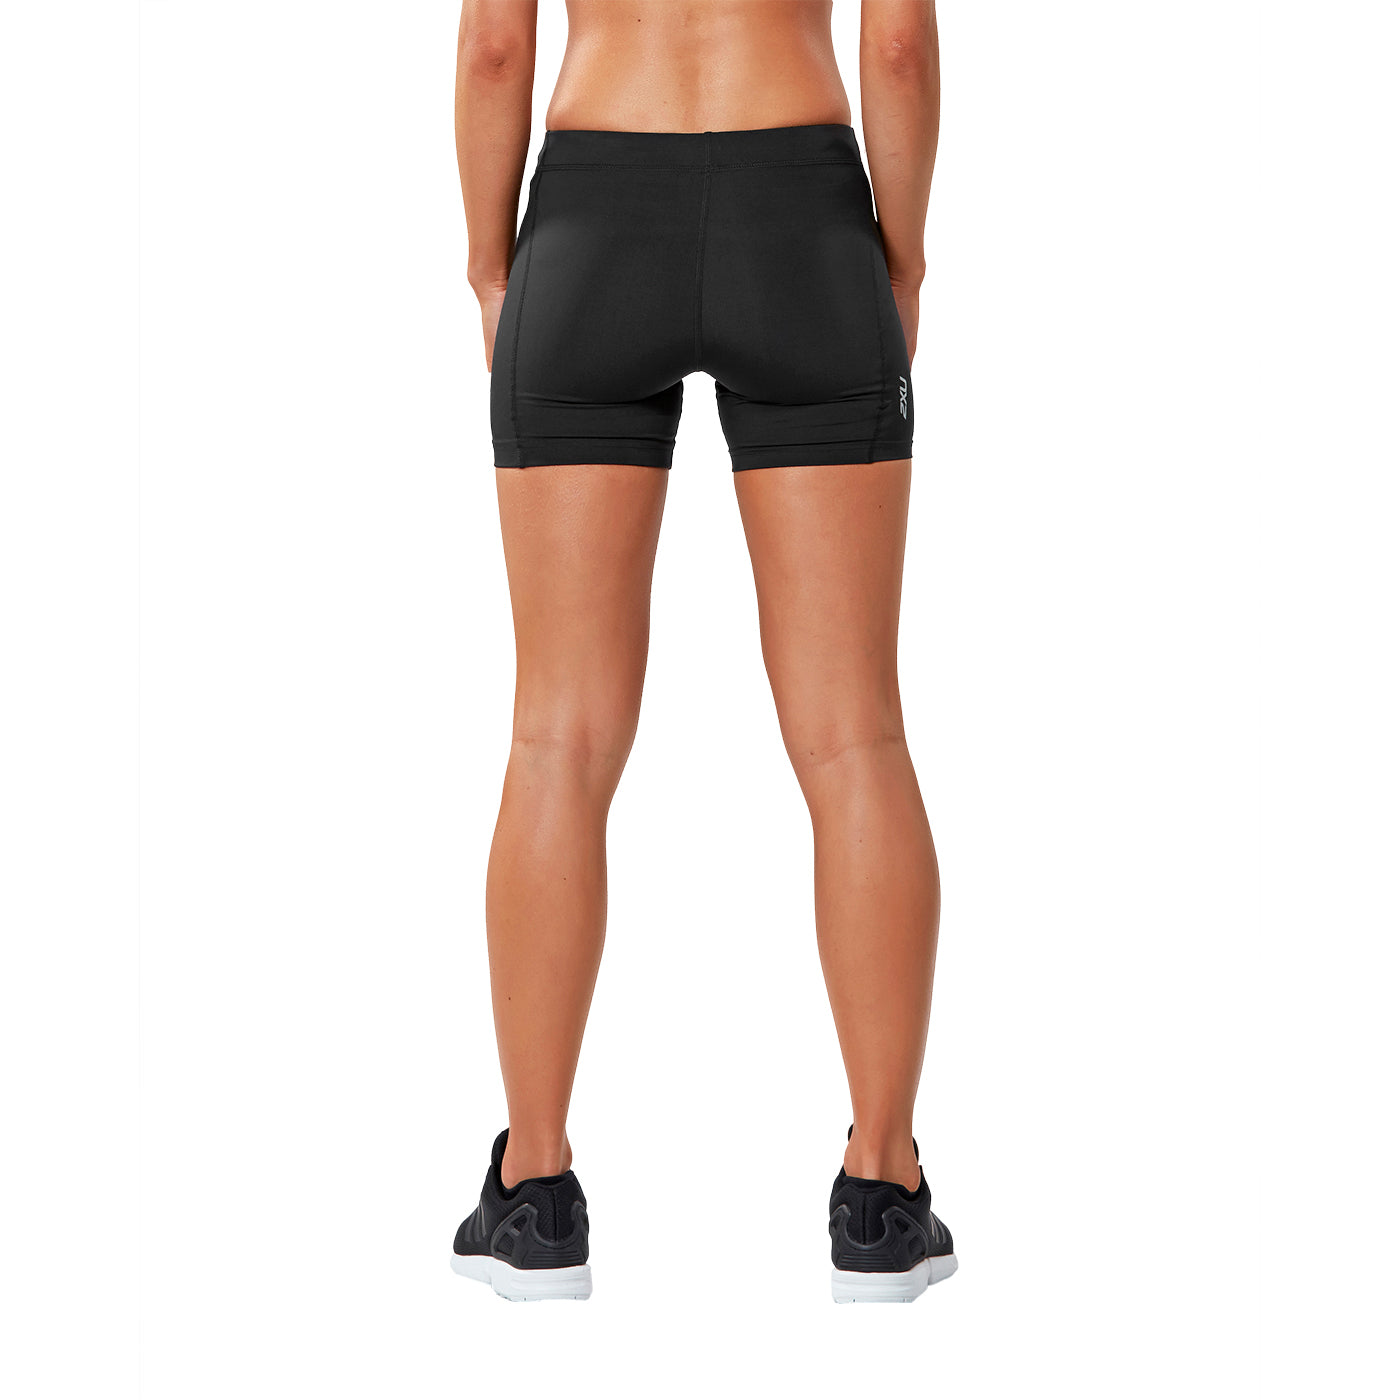 Bikeshort Form Mid-Rise Compression 4 inch Shorts